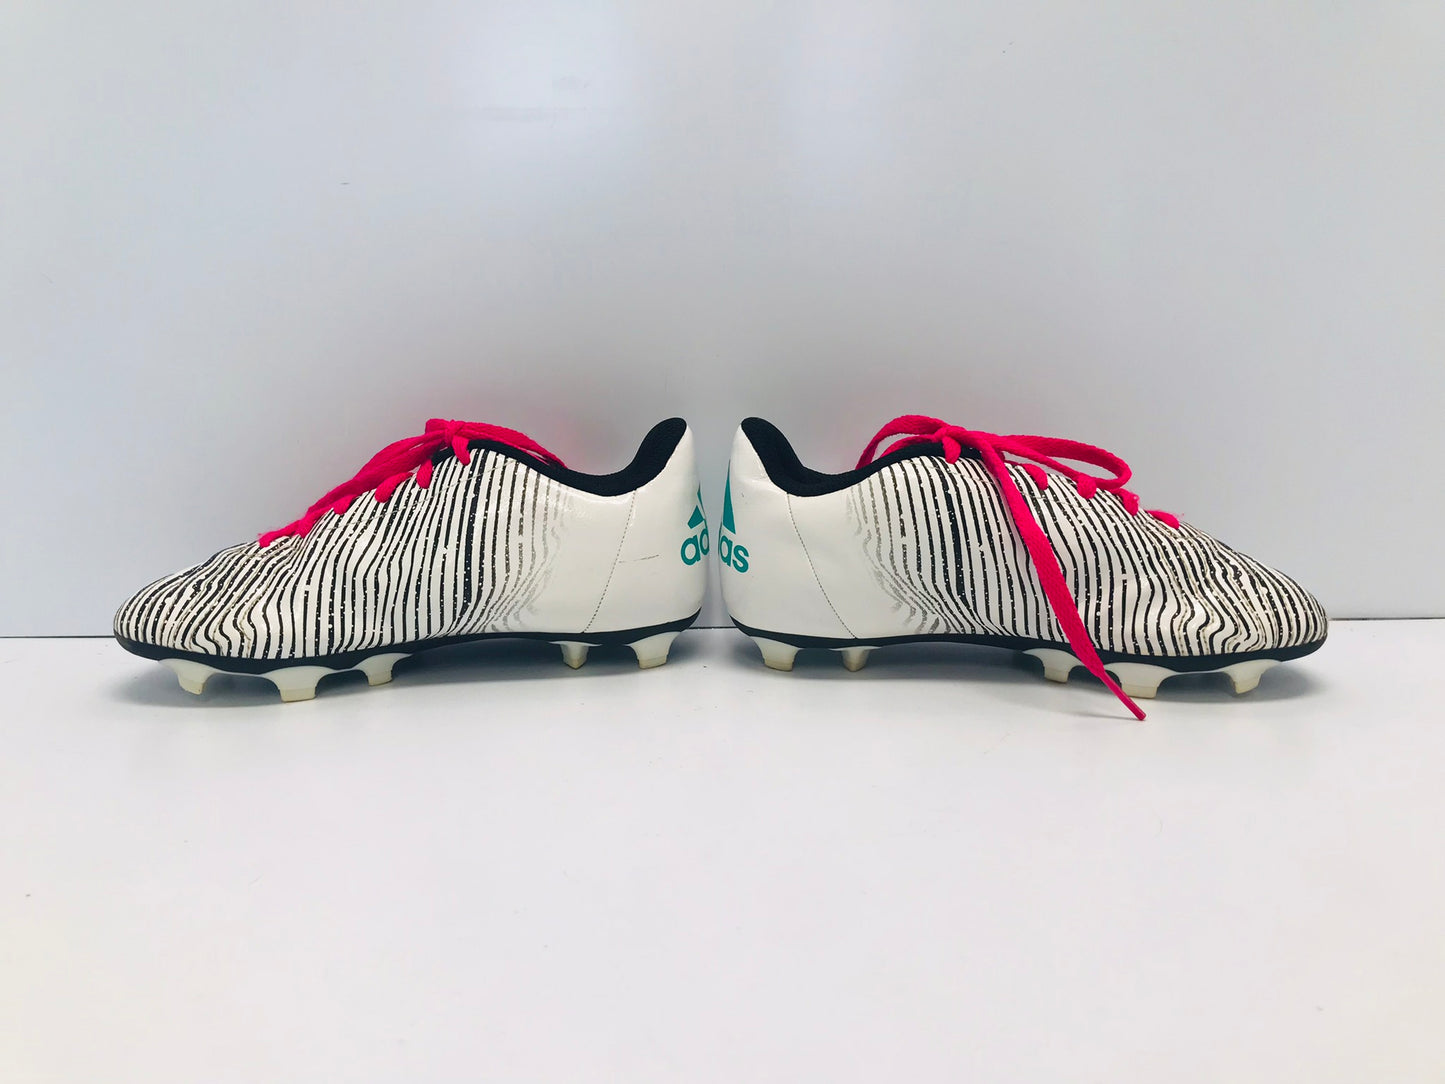 Soccer Shoes Cleats Child Size 1 Adidas White Black Pink Teal Like New